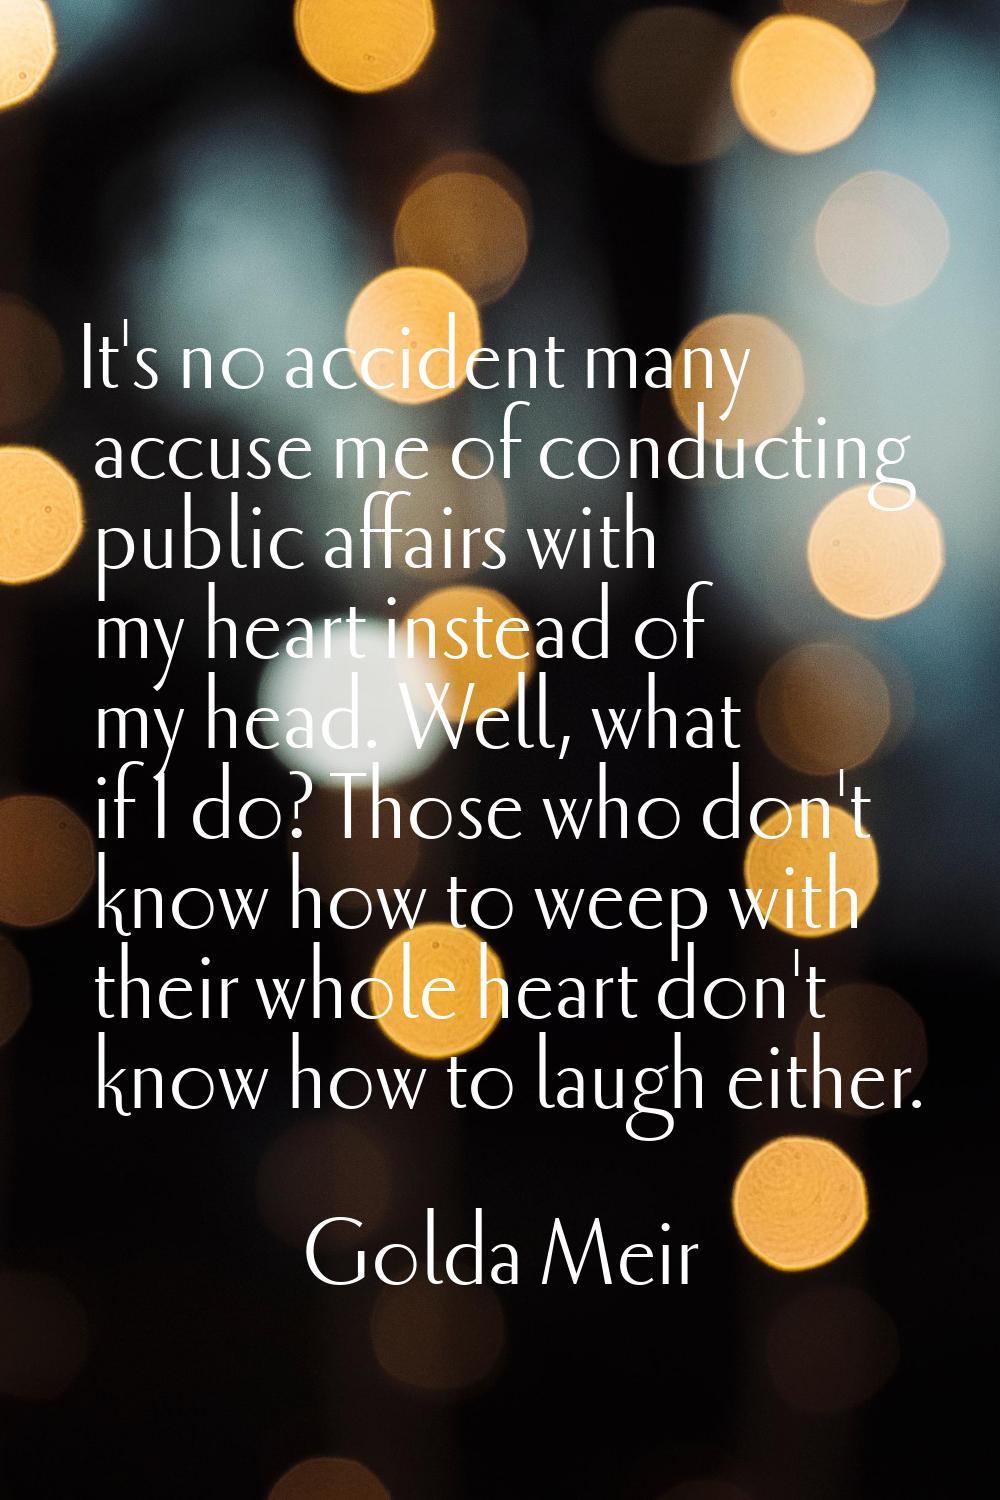 It's no accident many accuse me of conducting public affairs with my heart instead of my head. Well